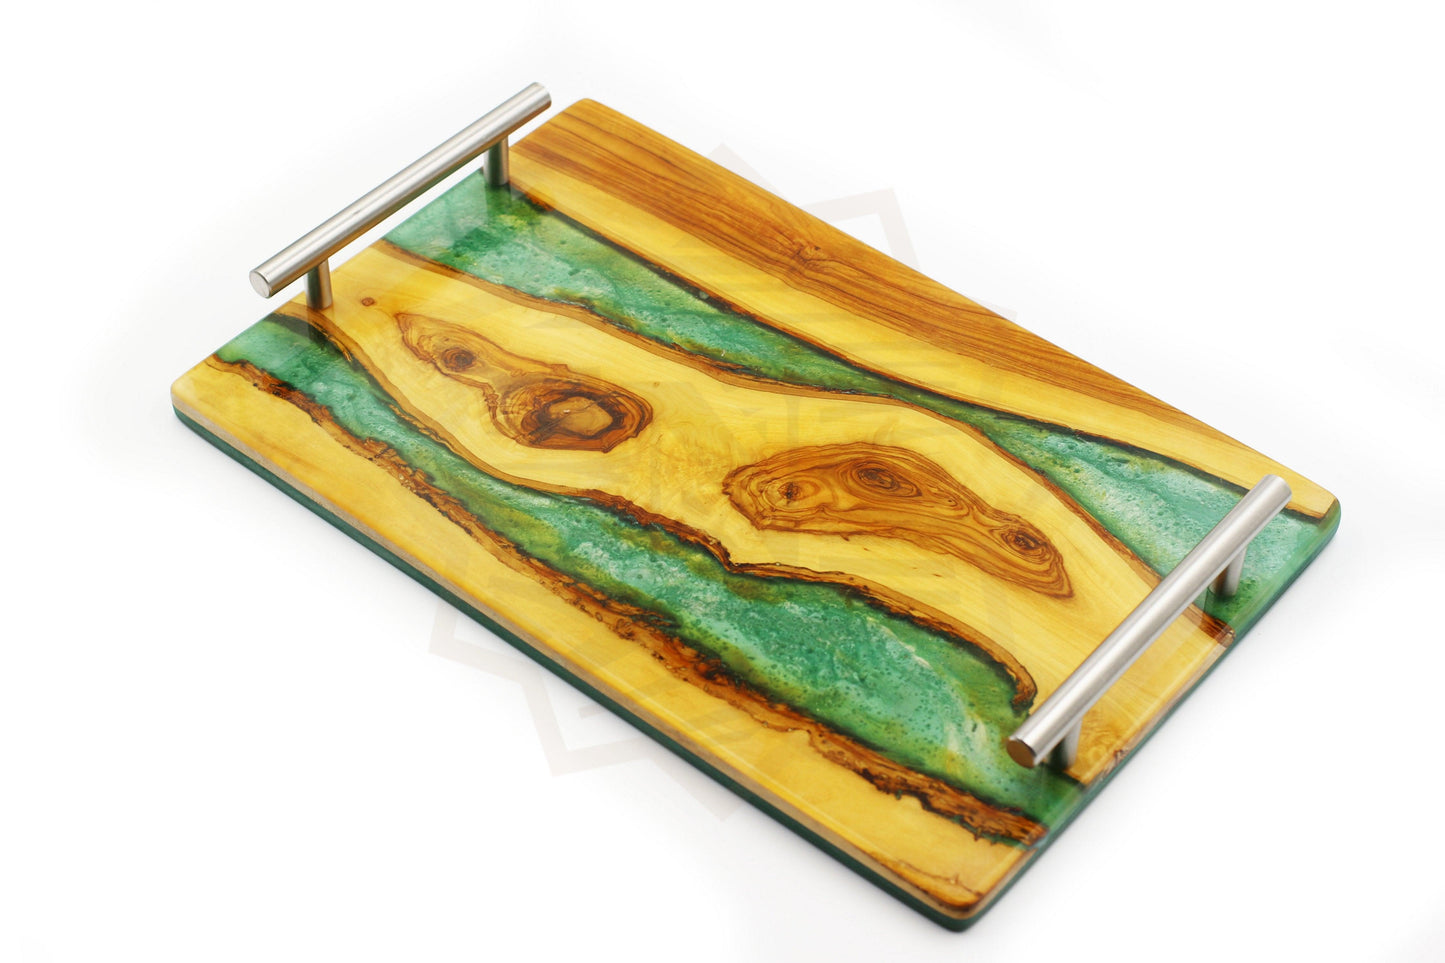 Olive wood tray with handles, perfect for serving and displaying dishes